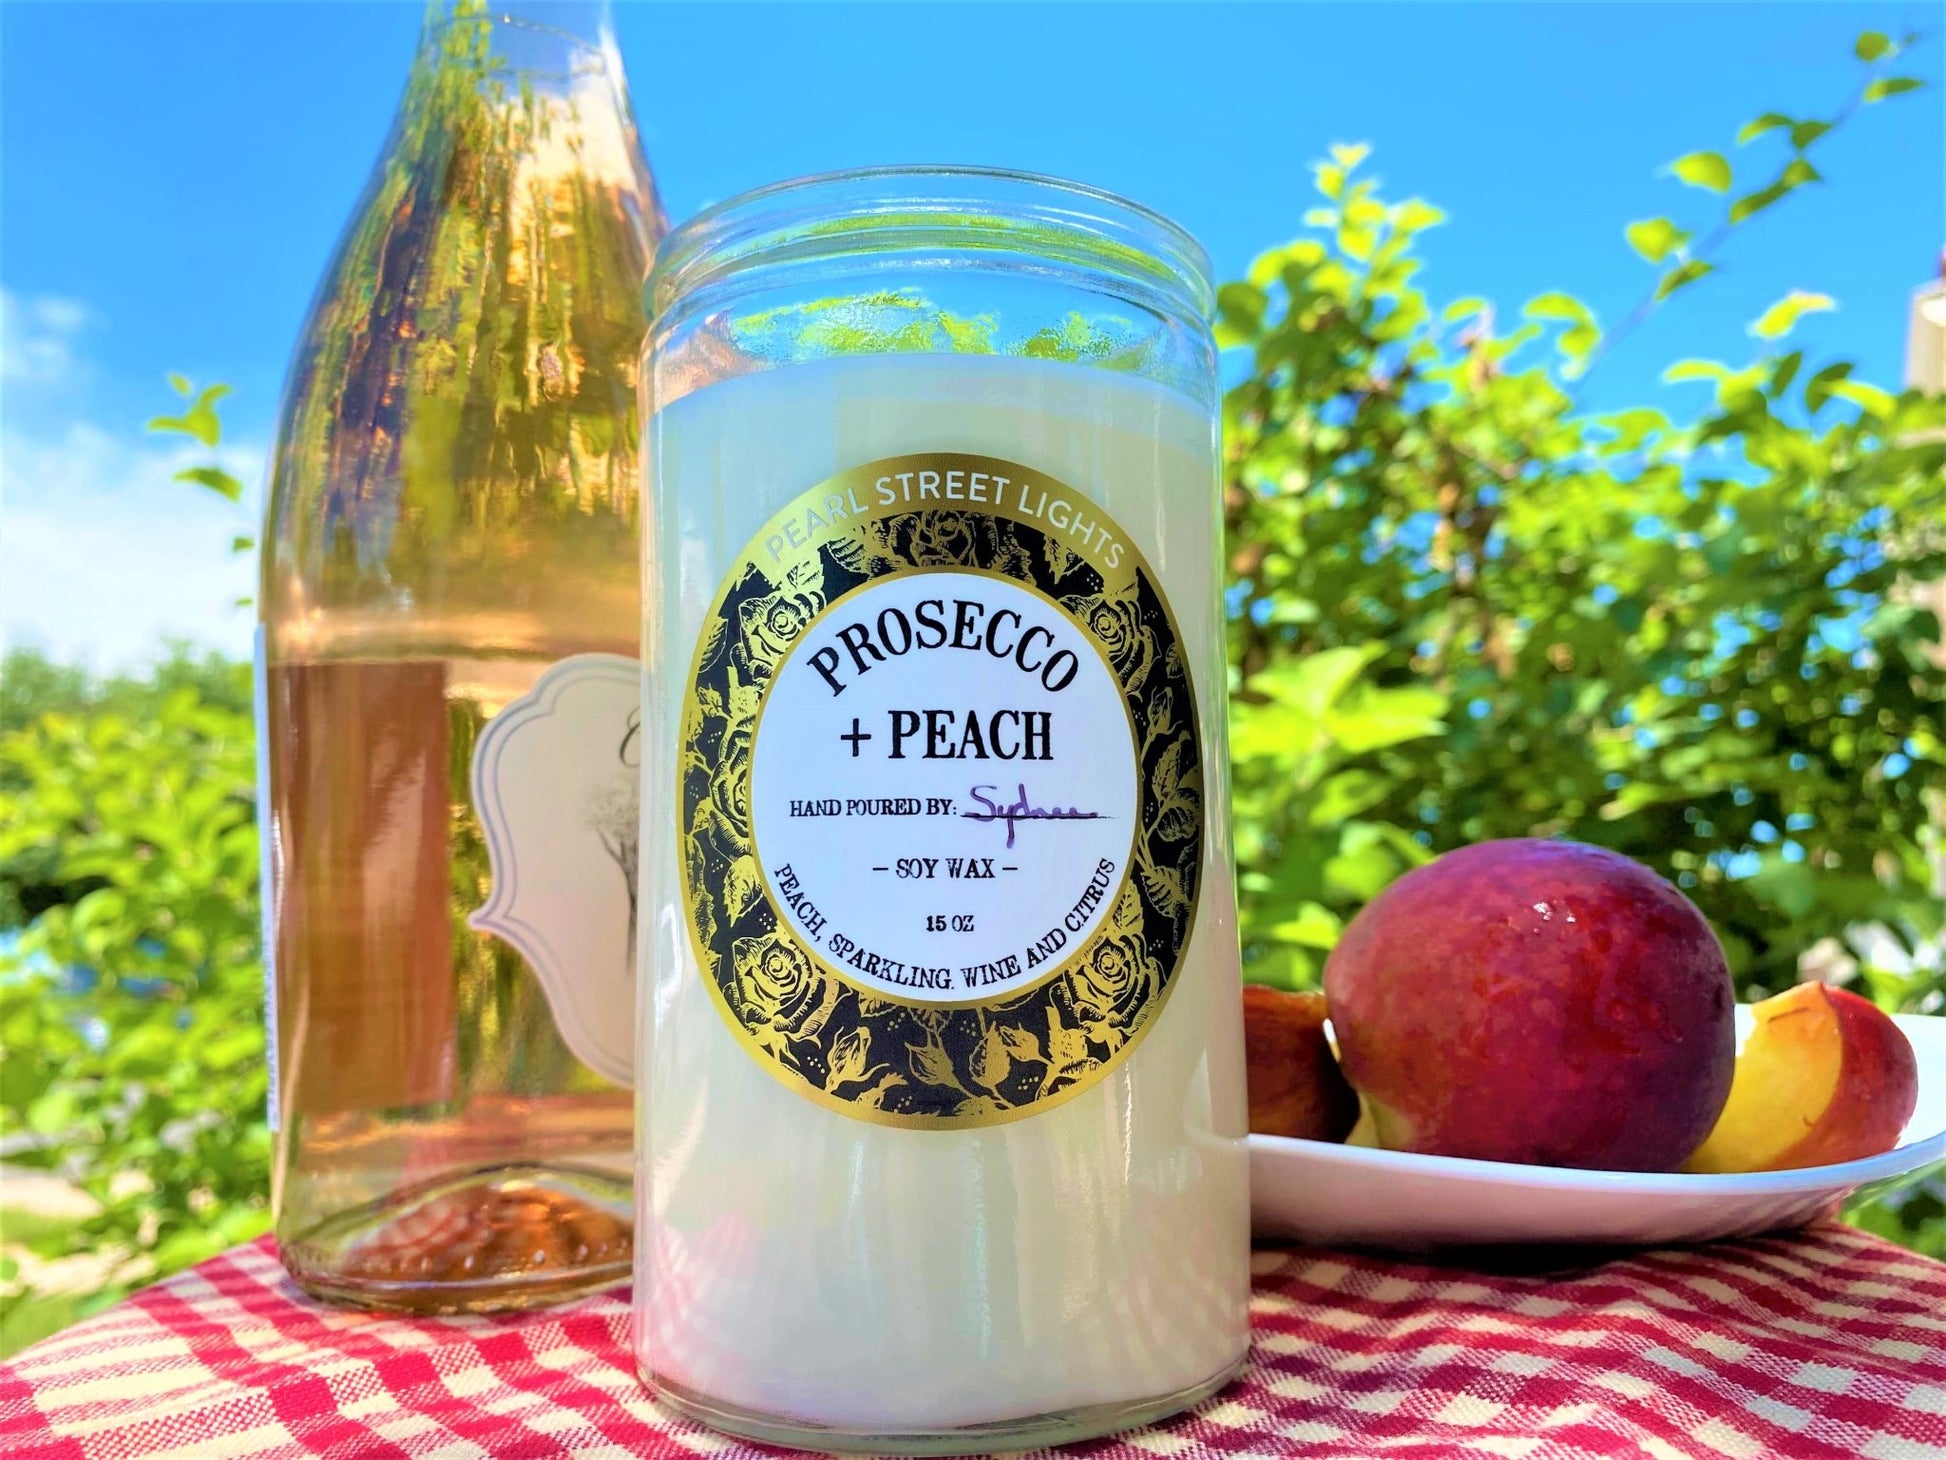 Prosecco + Peach Candle - Pearl Street Lights